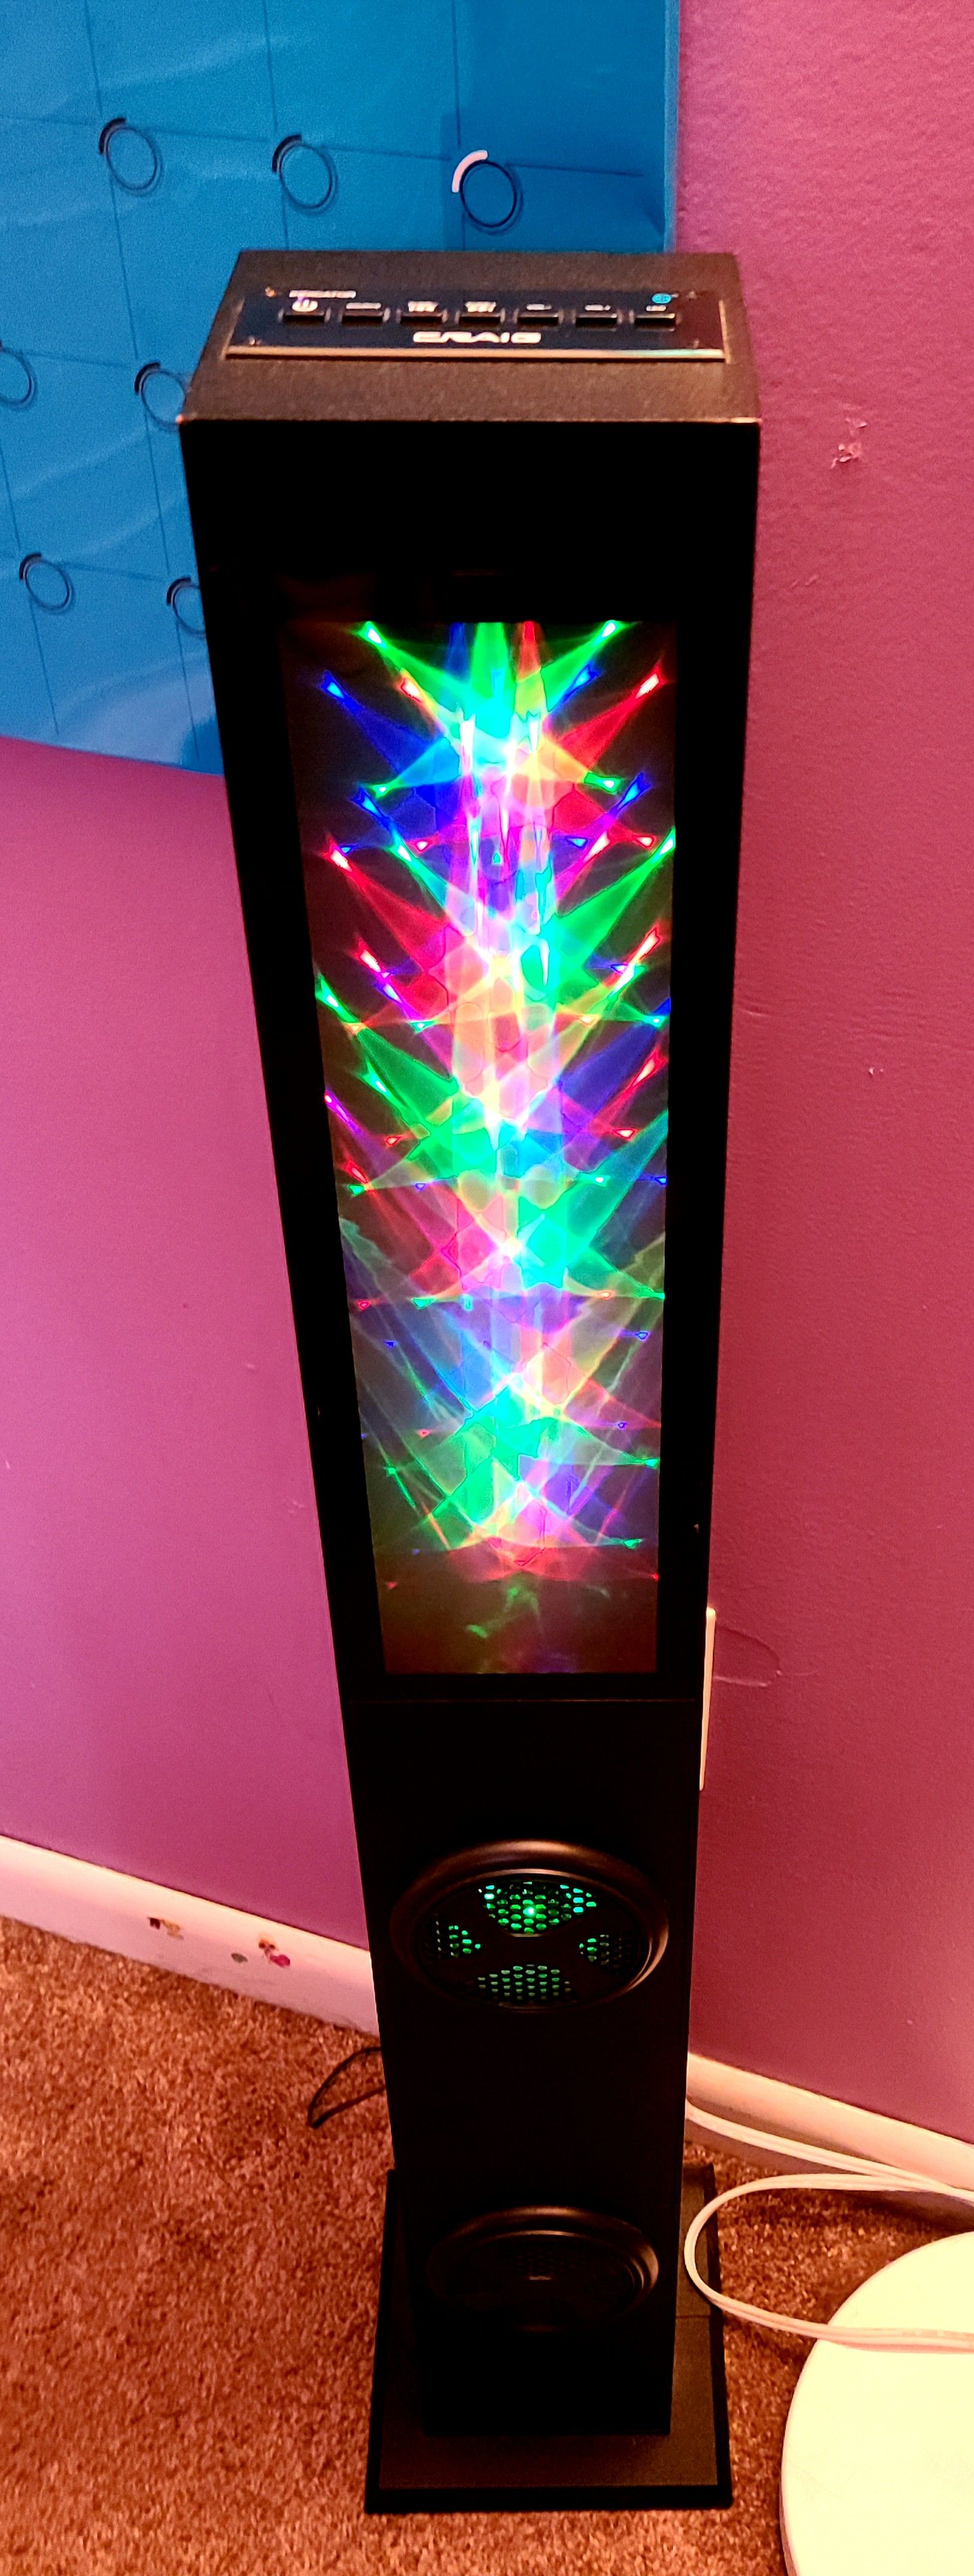 For Sale: Bluetooth LED tower speaker with remote